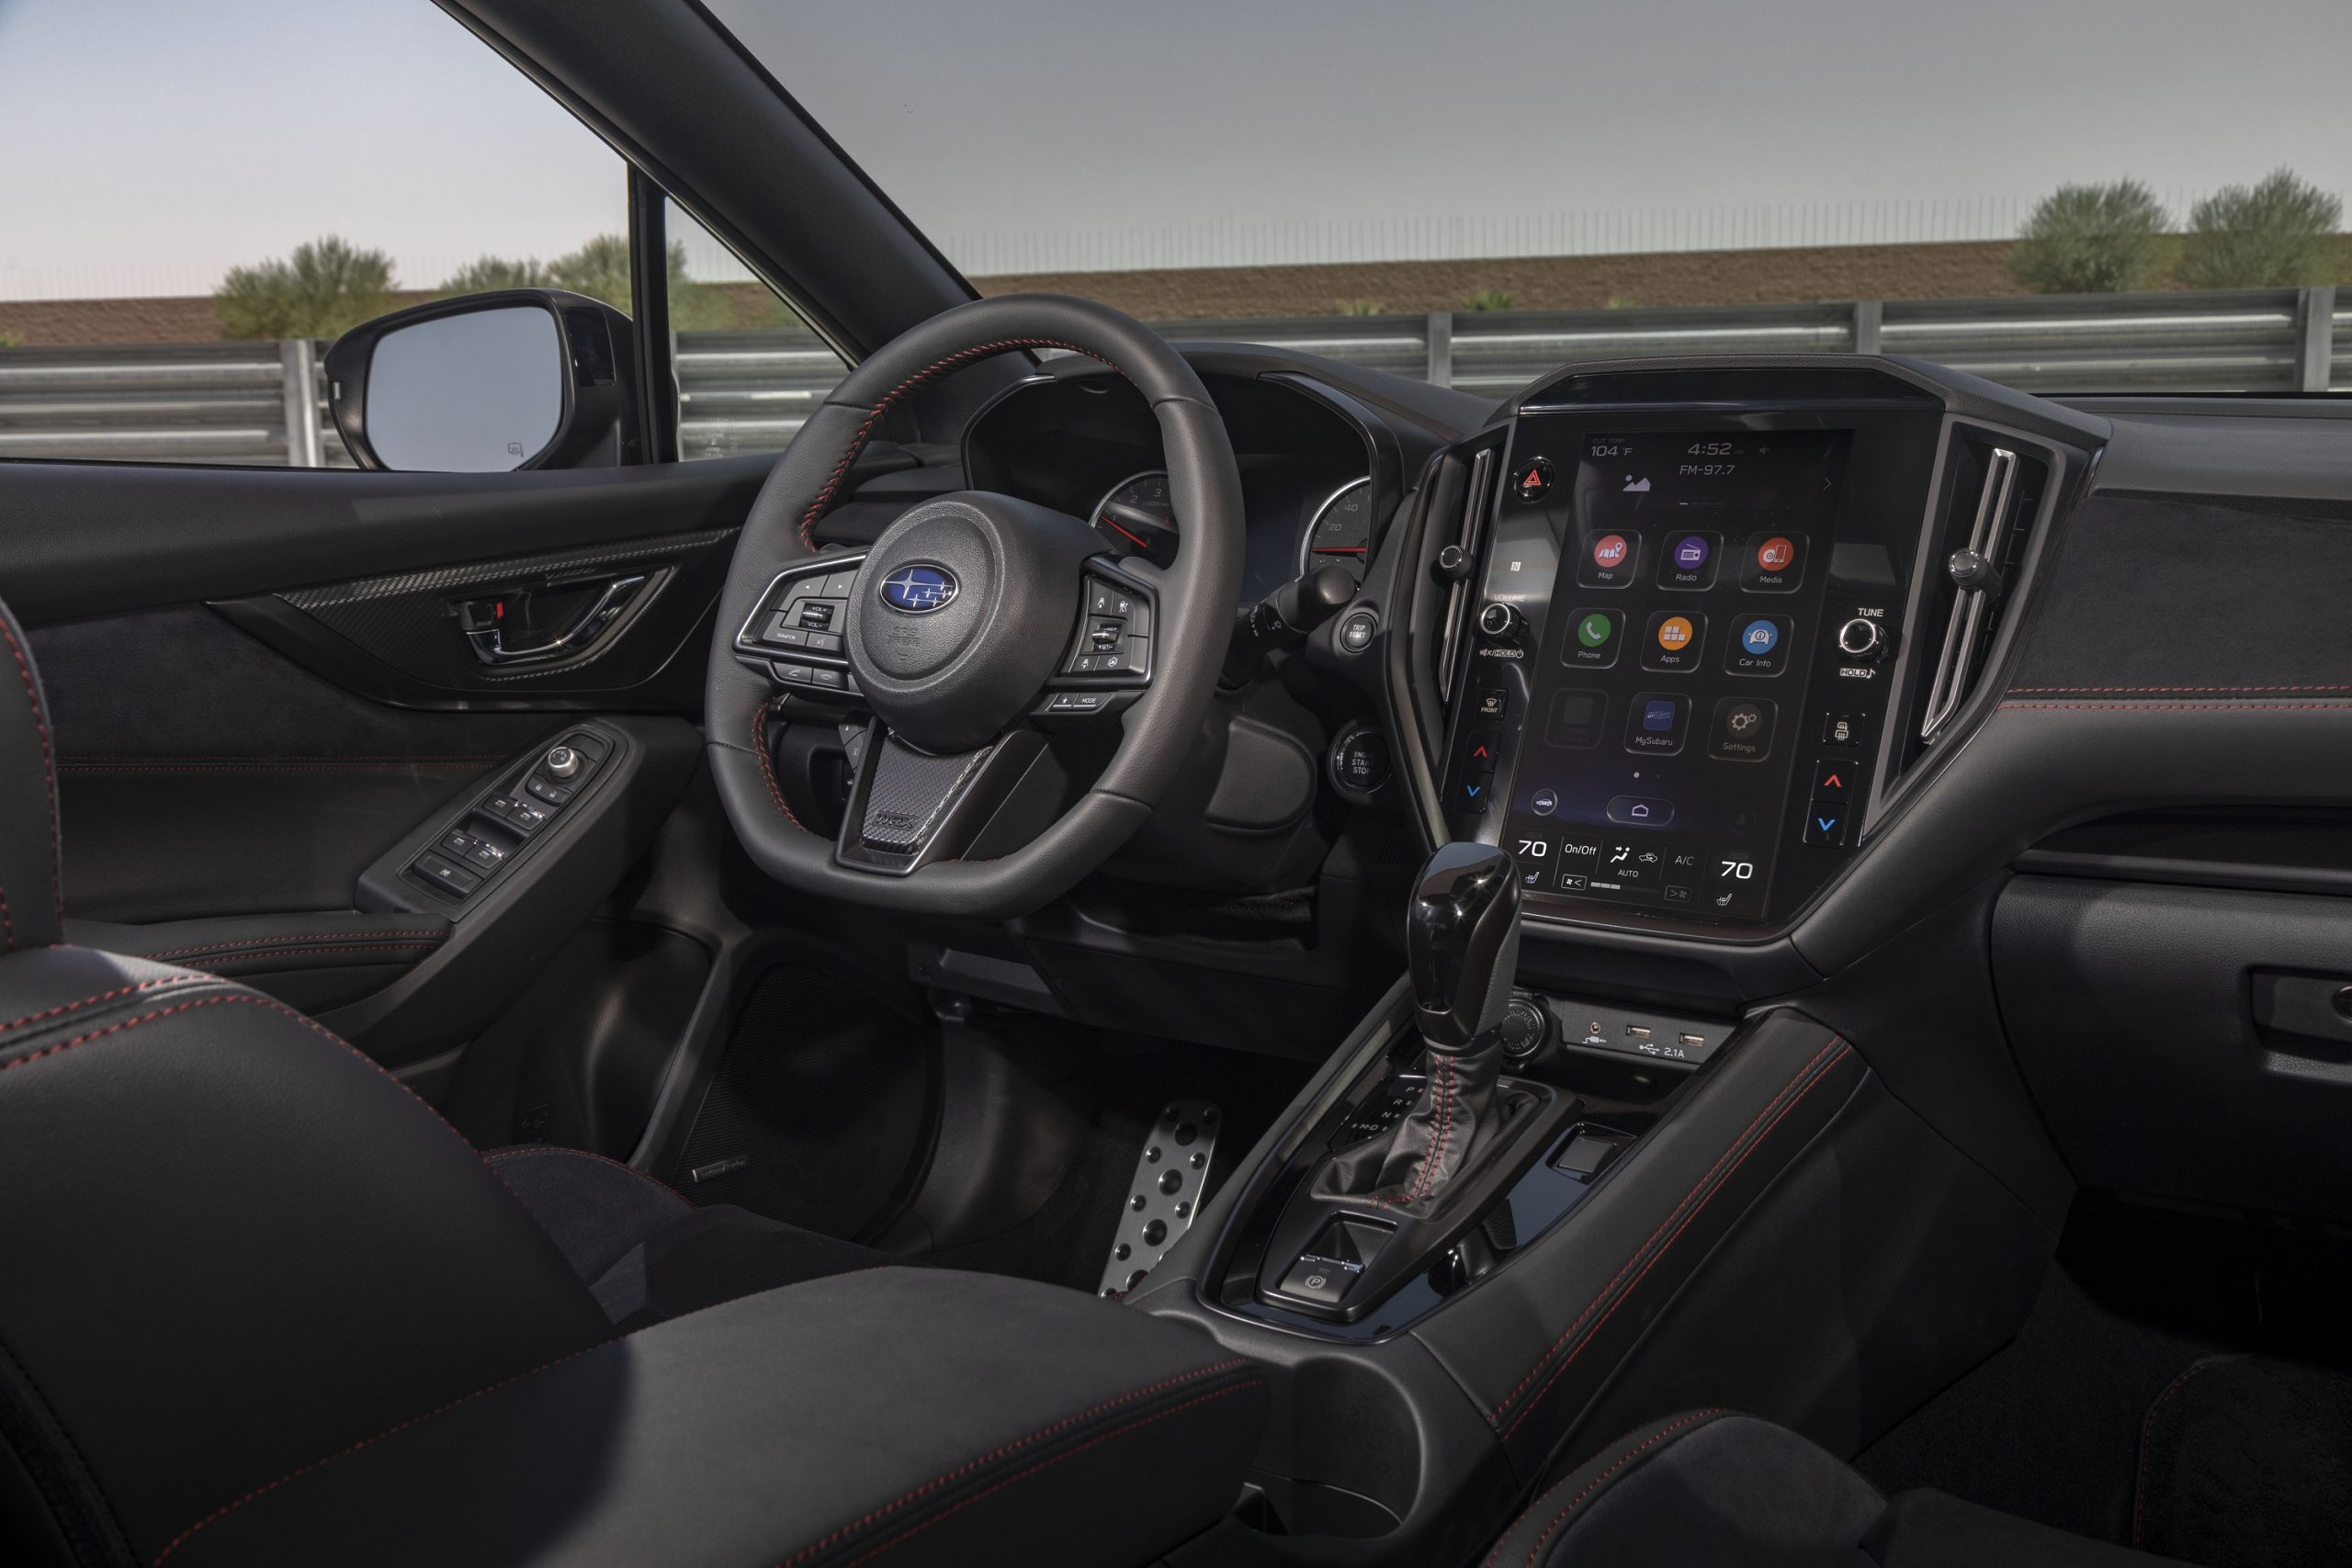 The revised interior of the new WRX with black alcantara seats